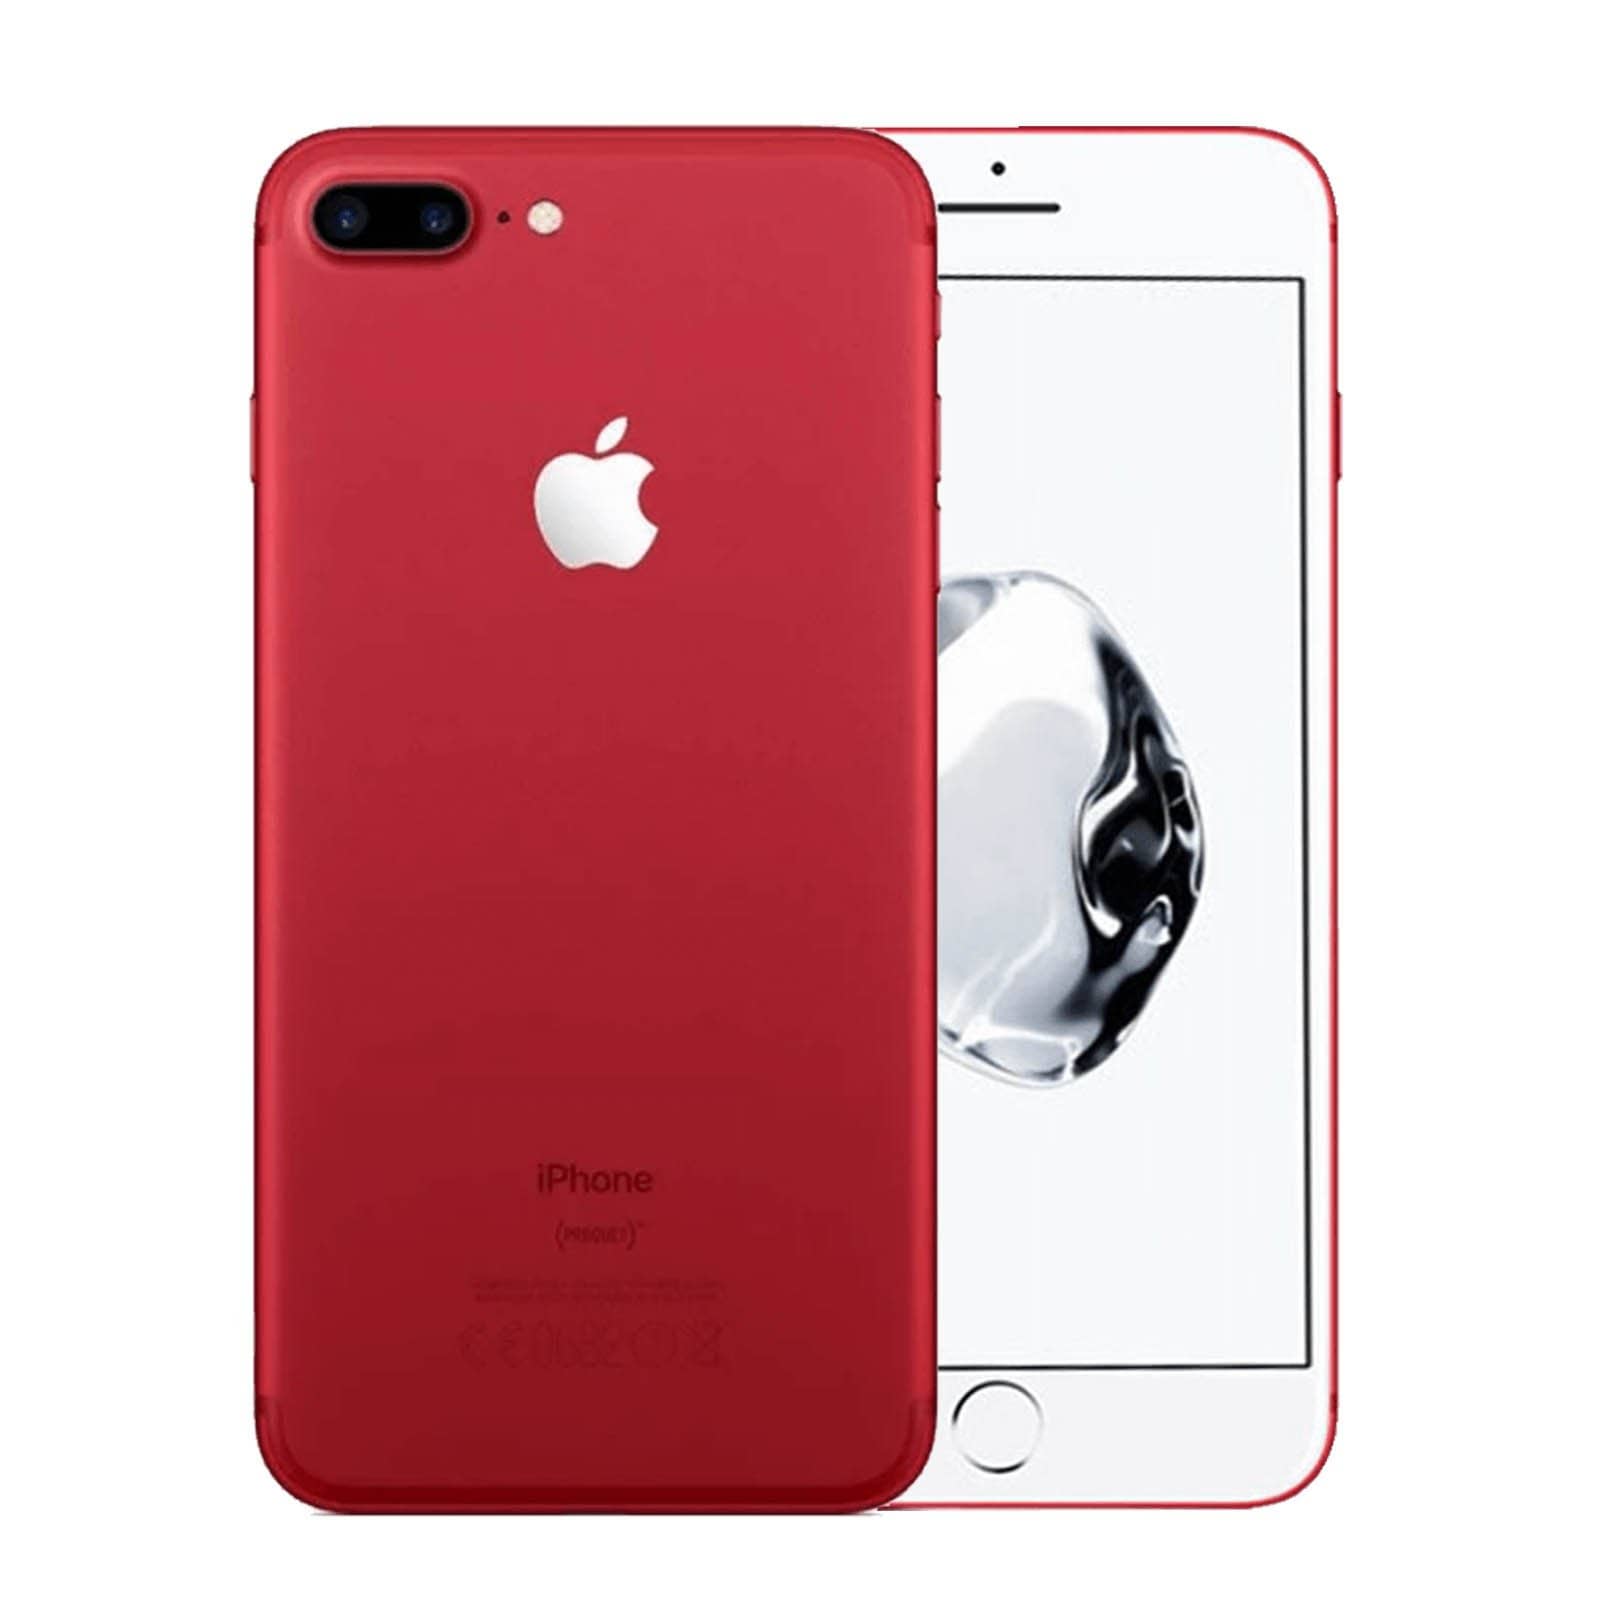 Apple iPhone 7 Plus 128GB Product Red Fair - Unlocked 128GB Product Red Fair